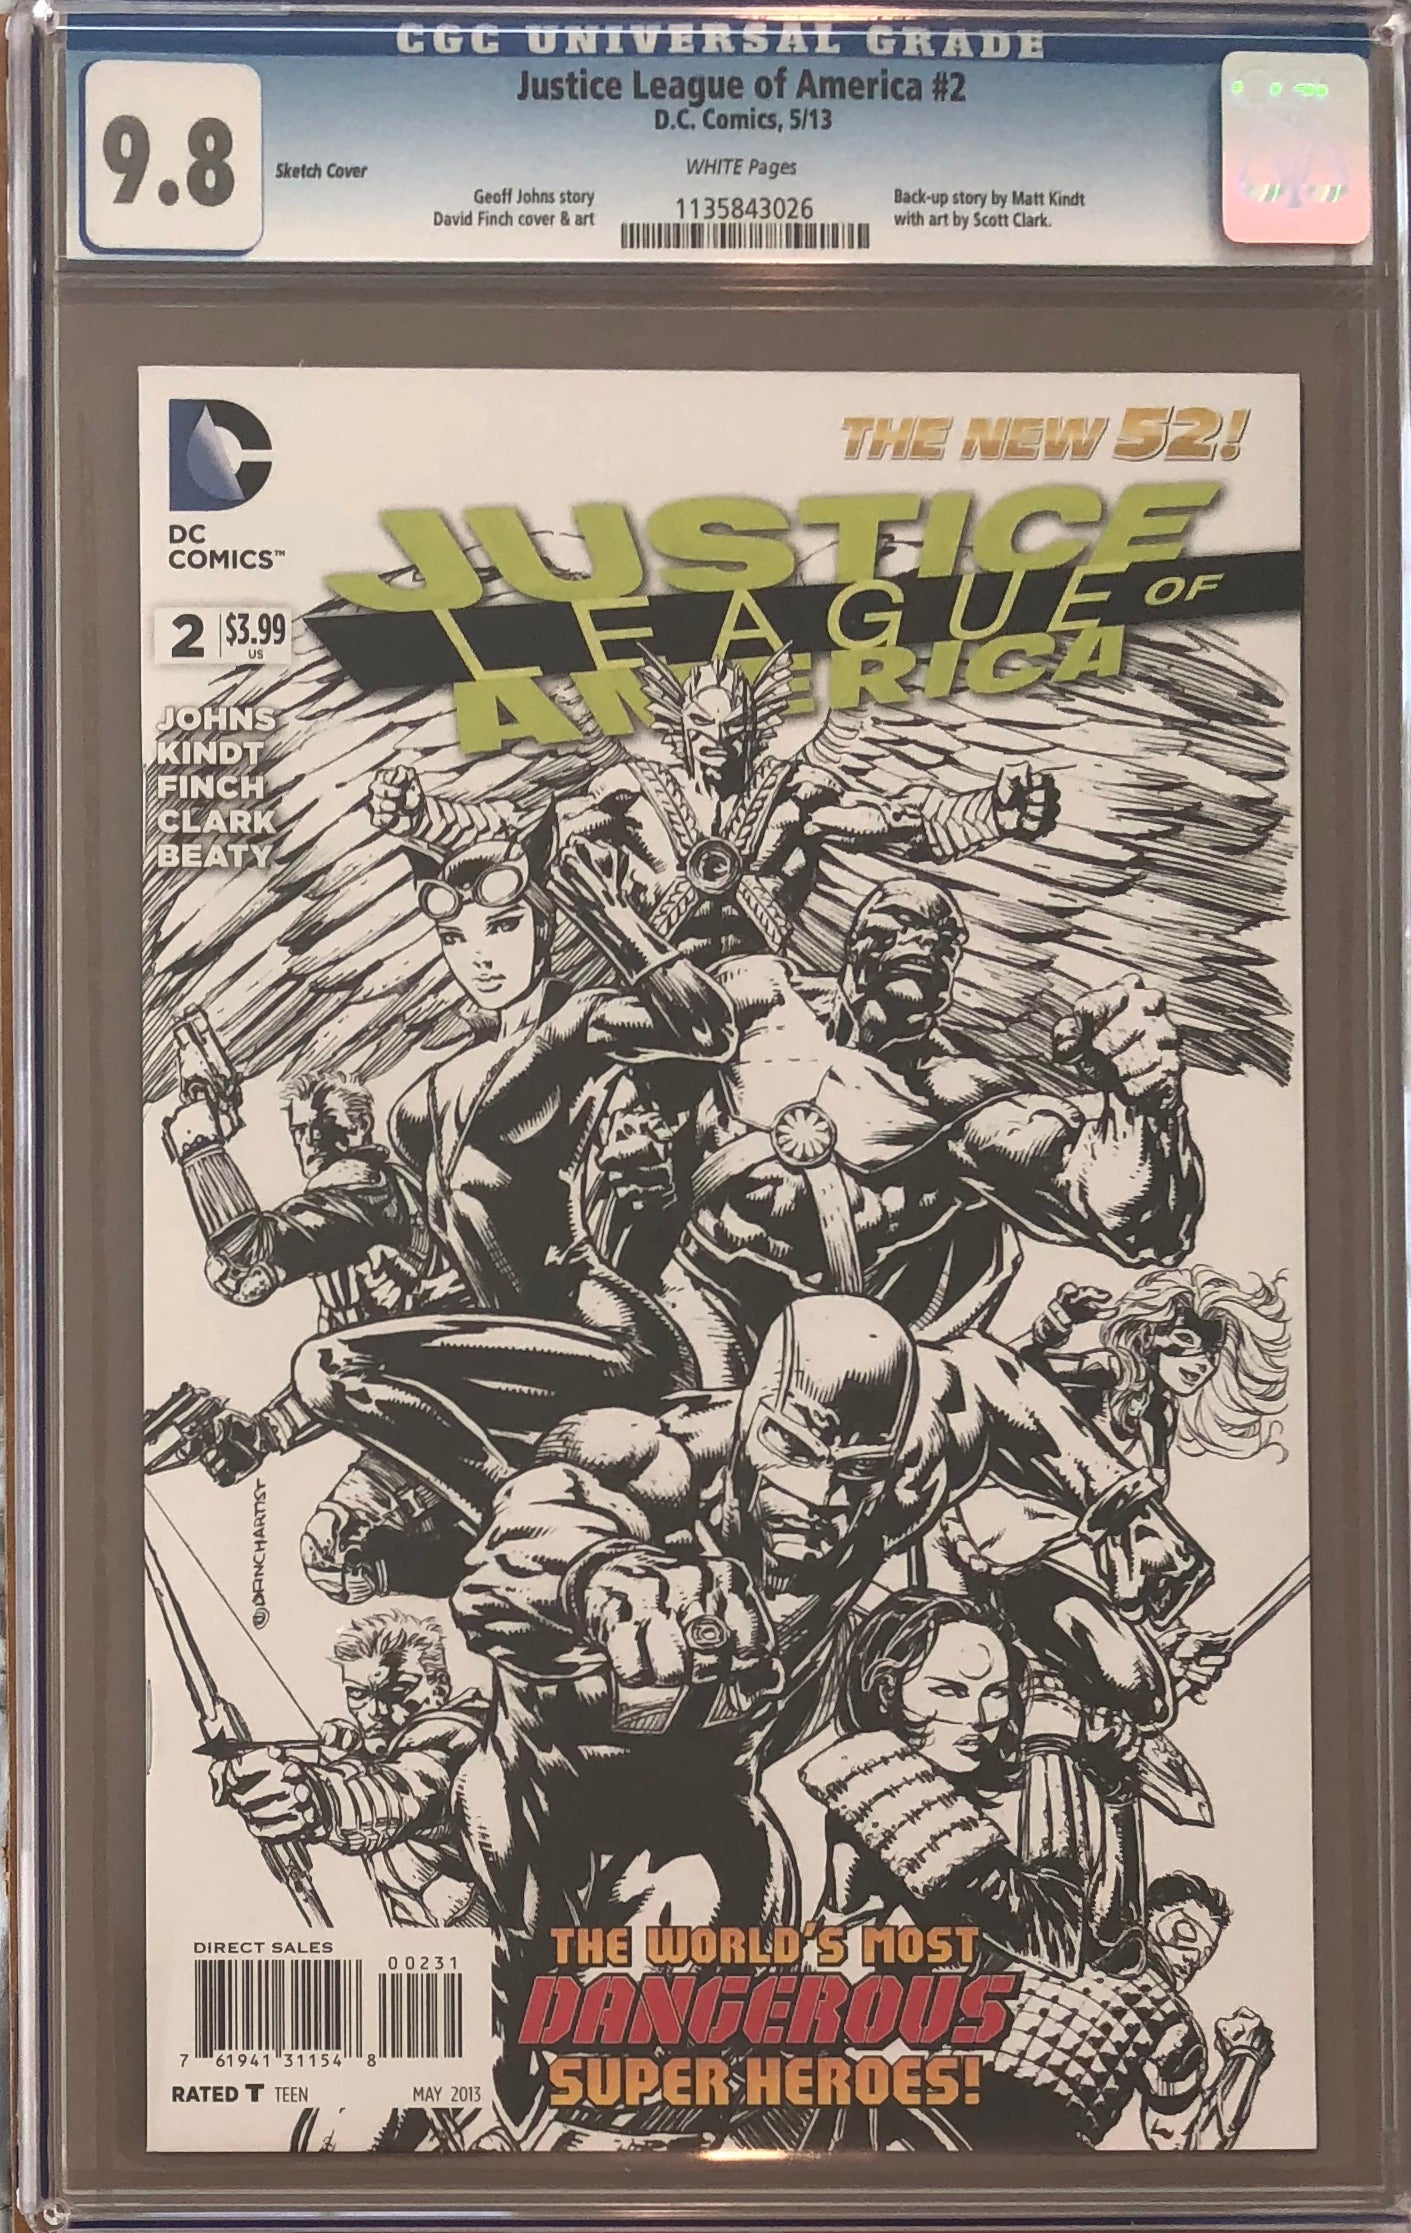 Justice League of America #2 Sketch Variant CGC 9.8